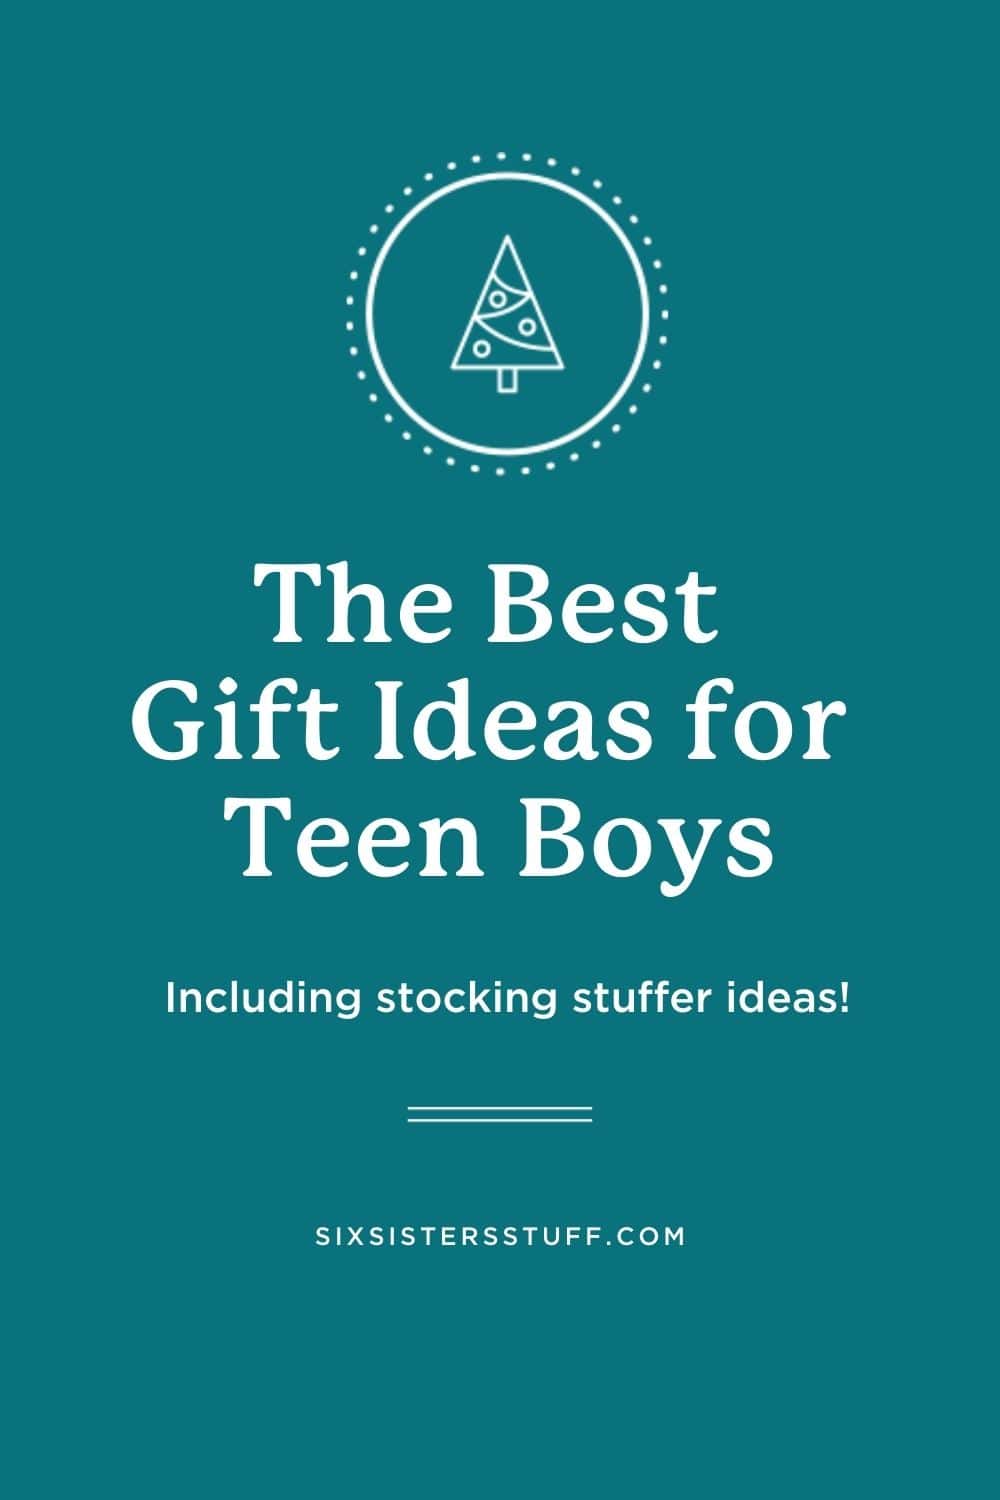 Stocking Stuffers Birthday Gifts For Her and Him, India